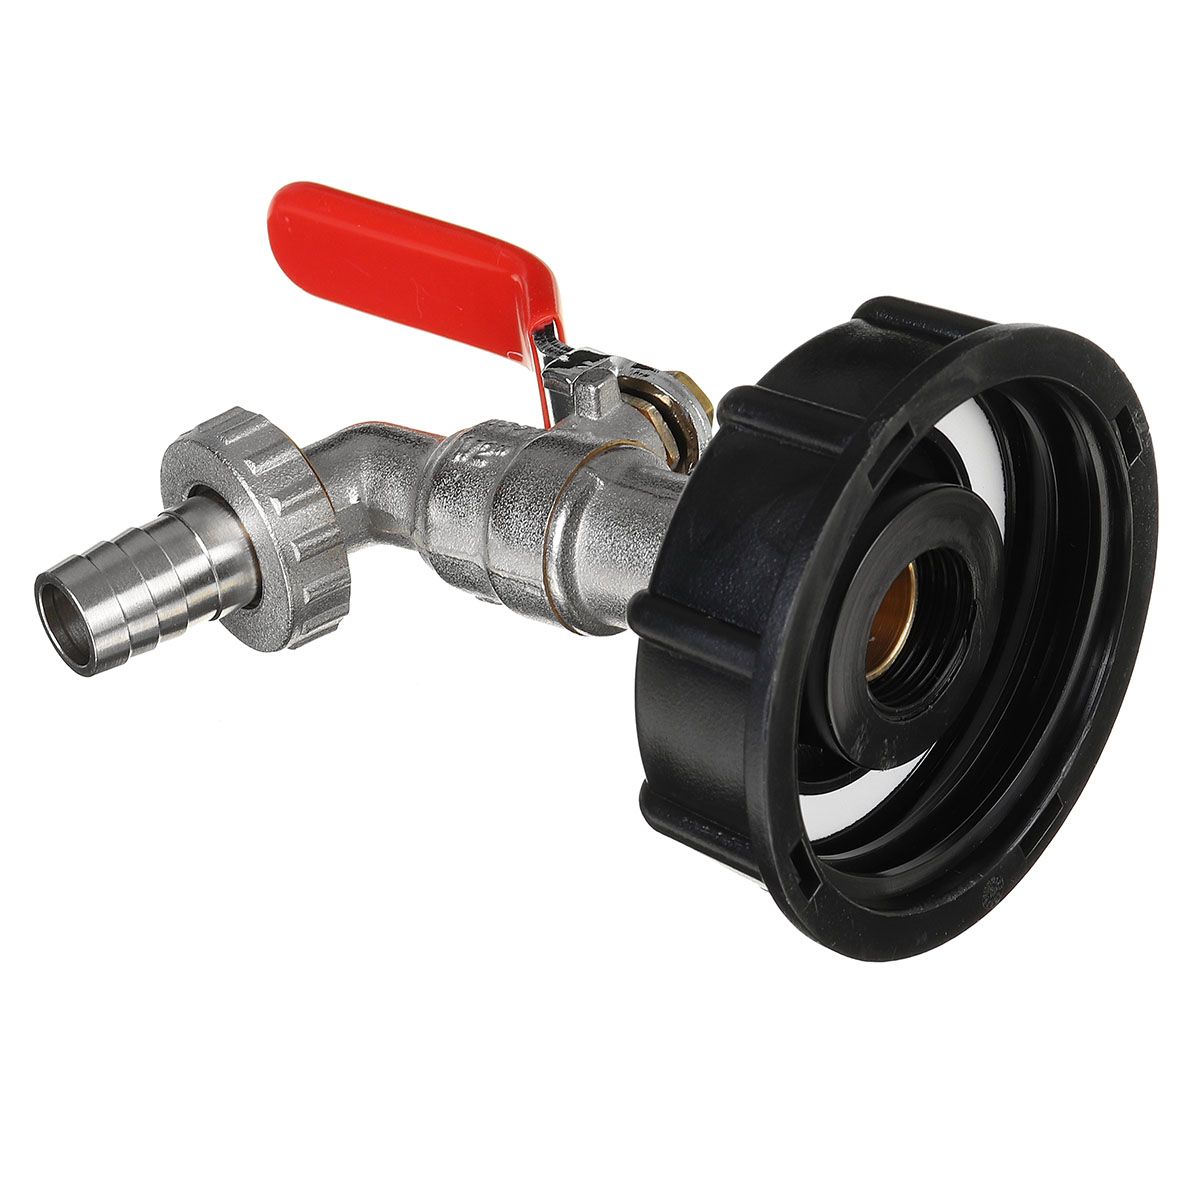 12-Inch-S60x6-IBC-Water-Tank-Adapter-Tap-Outlet-Replacement-Valve-Fitting-for-Garden-Water-Connector-1667222